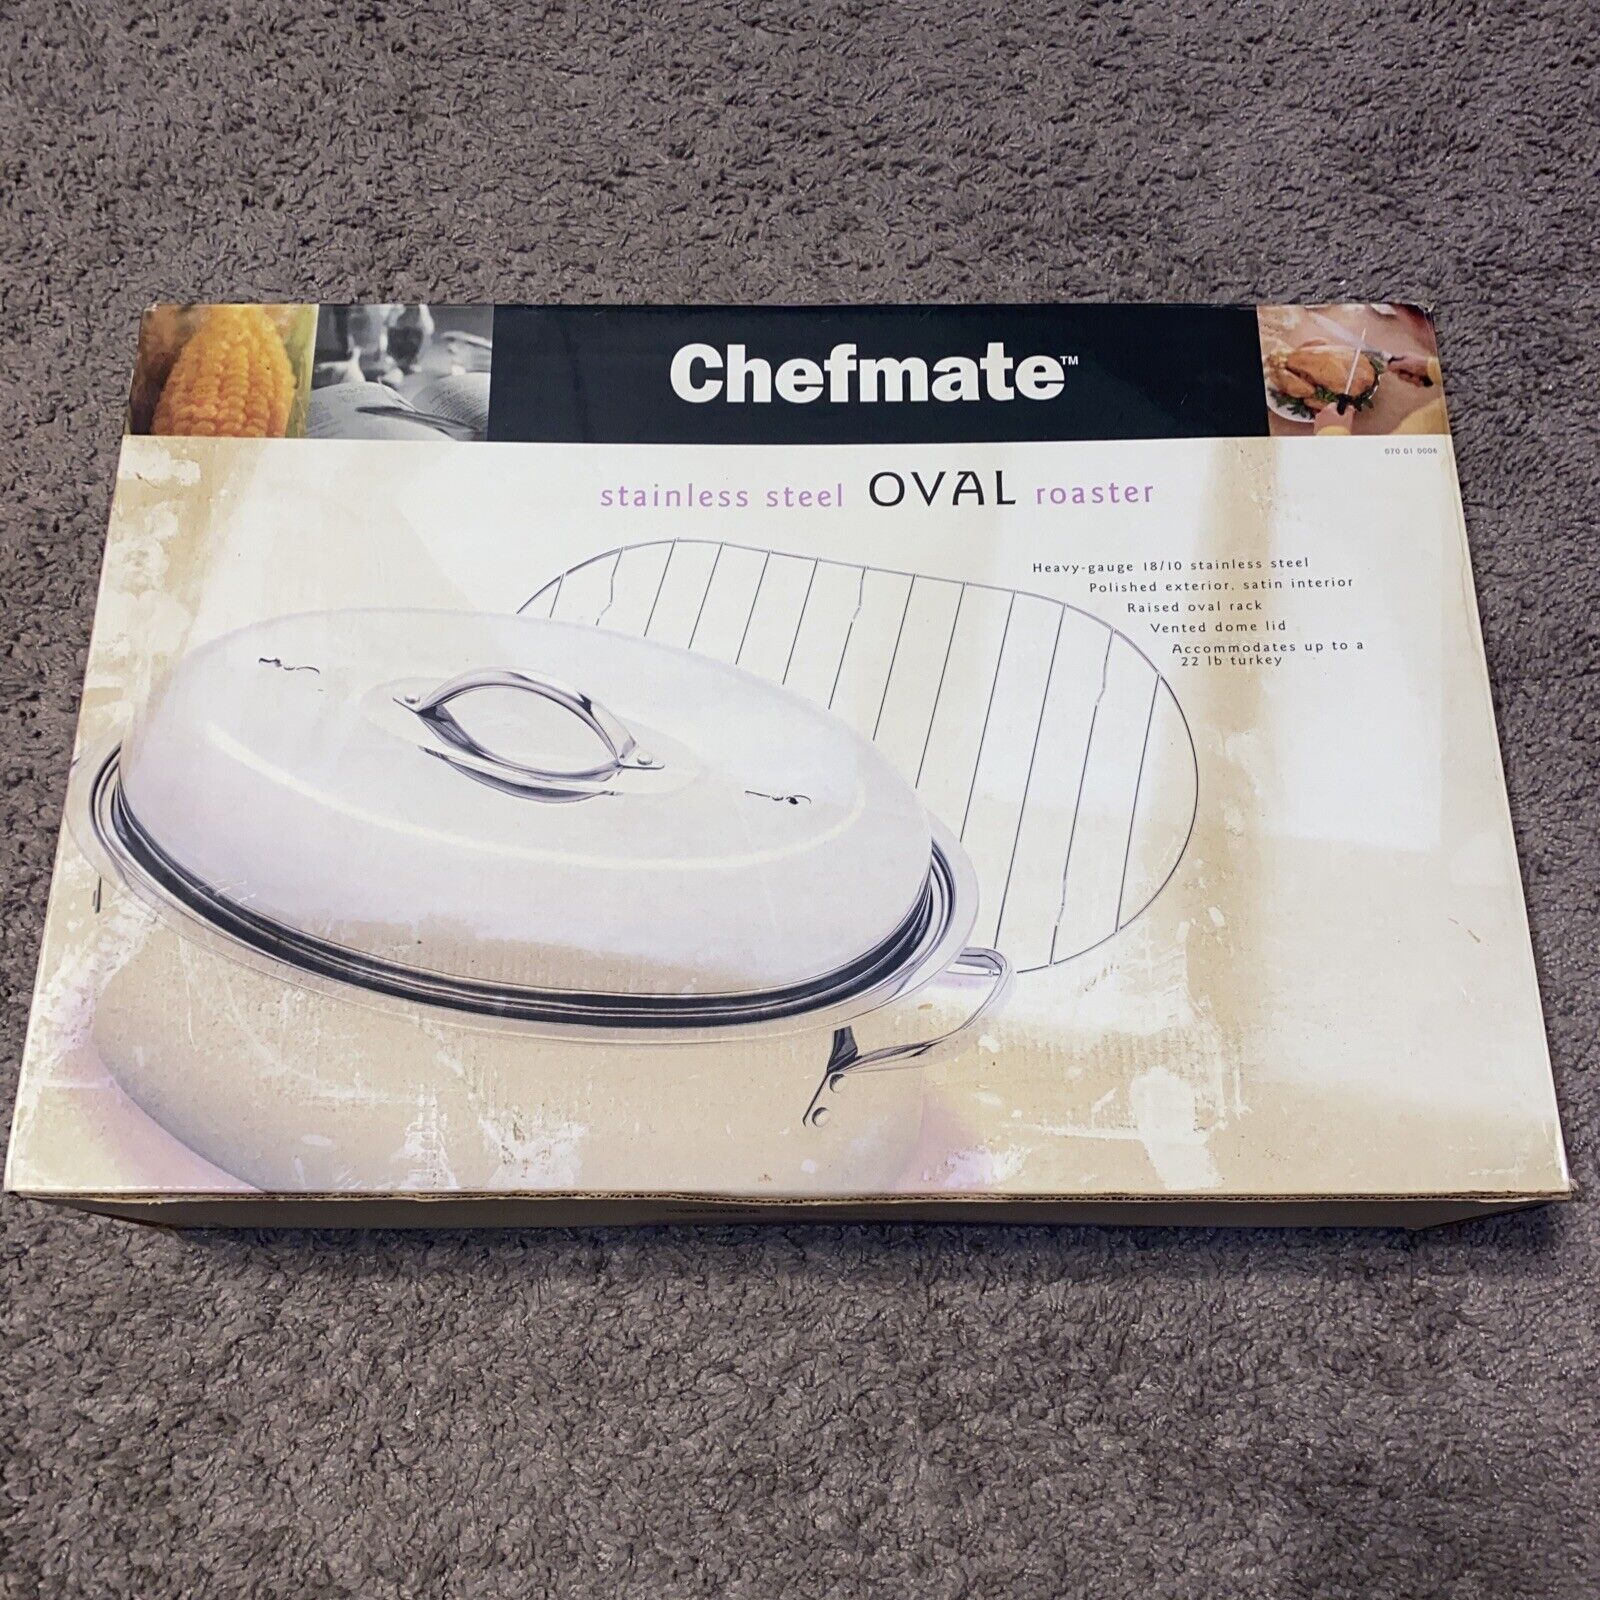 RARE VTG Chefmate 18/10 Stainless Steel Oval Roaster W/Lid (UP TO 22LB TURKEY)